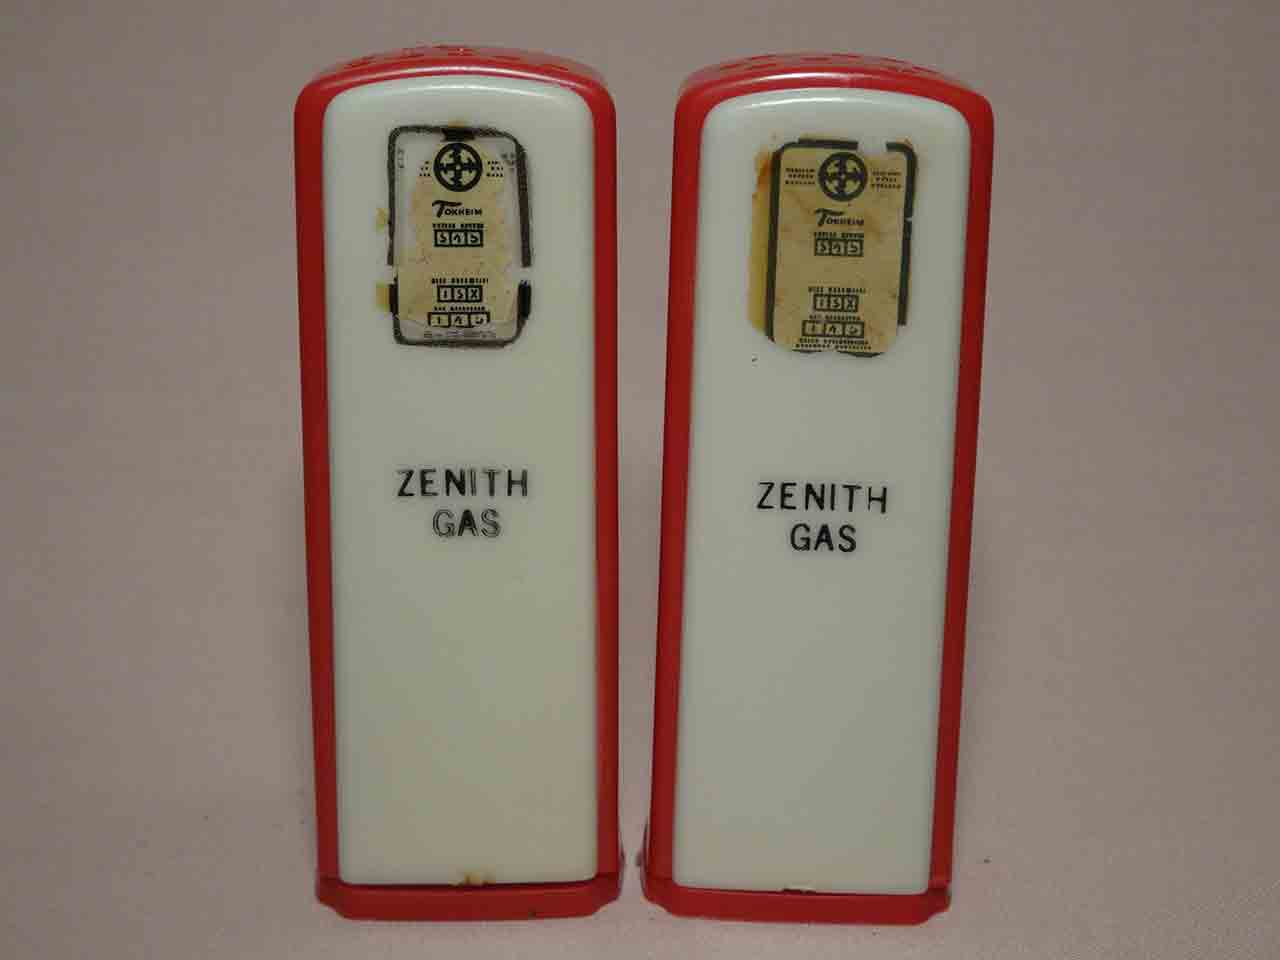 Plastic advertising gas pumps salt and pepper shakers - Zenith